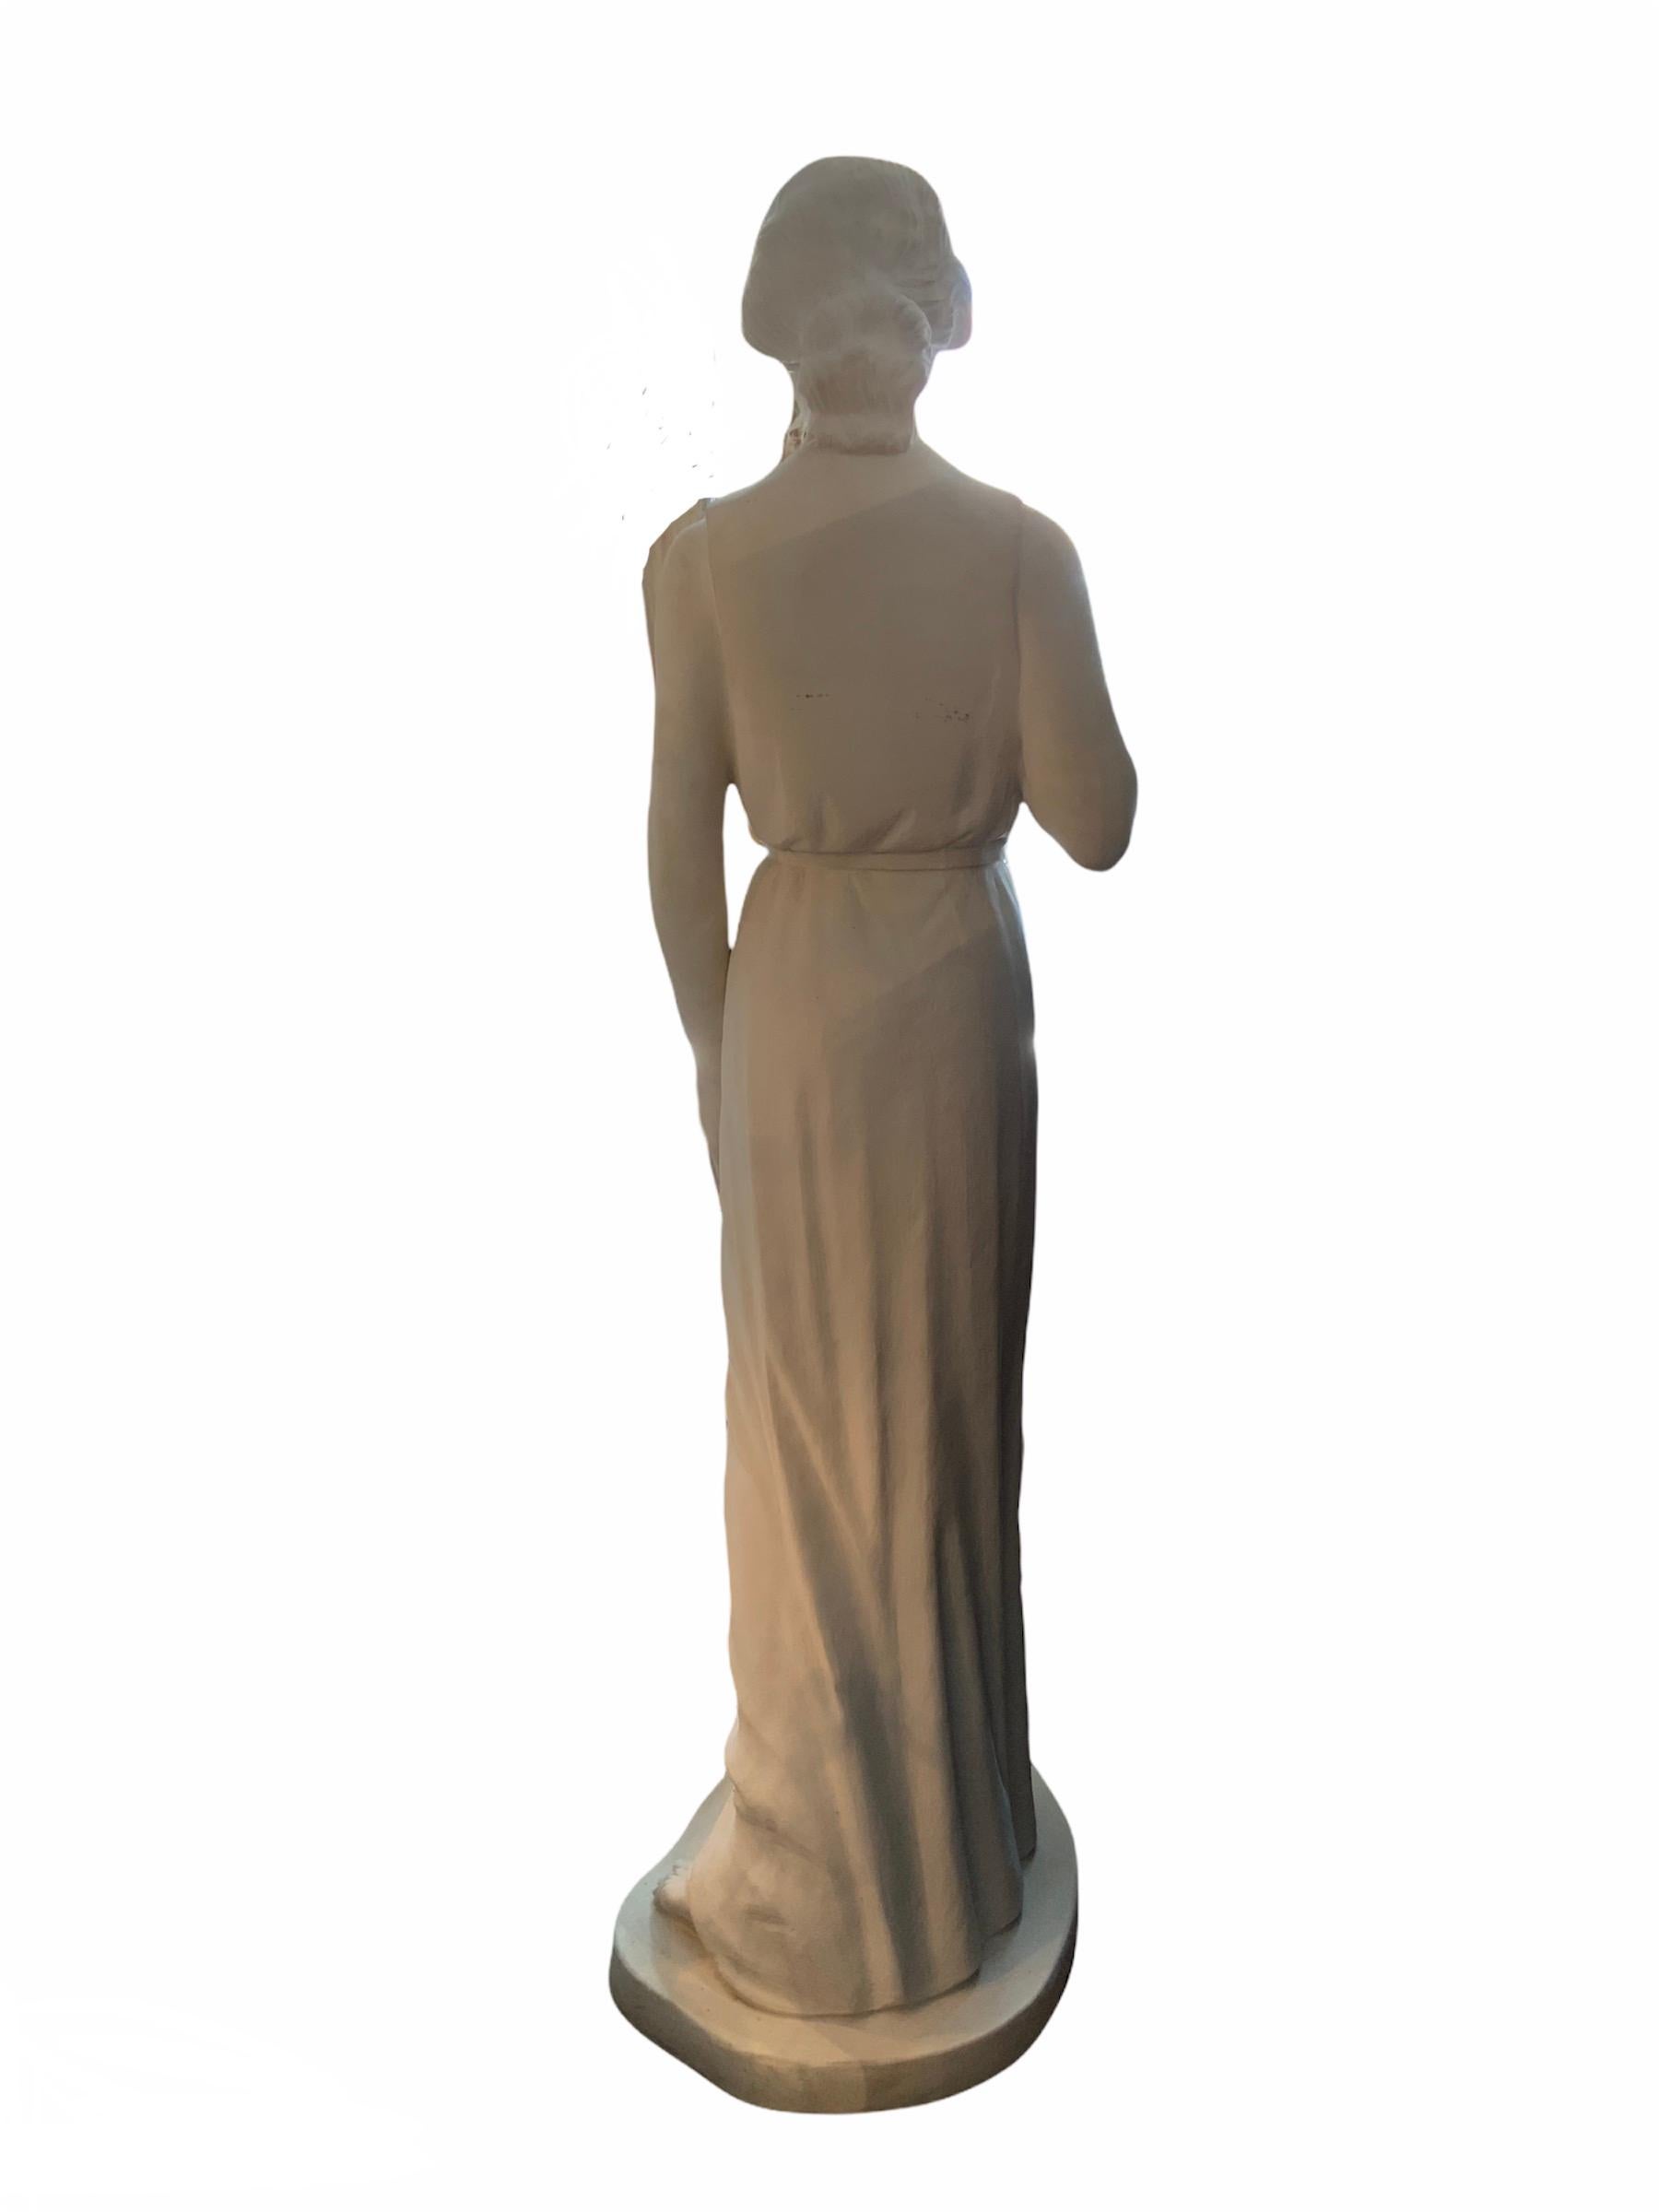 Life Size Bonded or Cold Cast Marble Garden Sculpture of a Young Girl In Good Condition For Sale In Guaynabo, PR